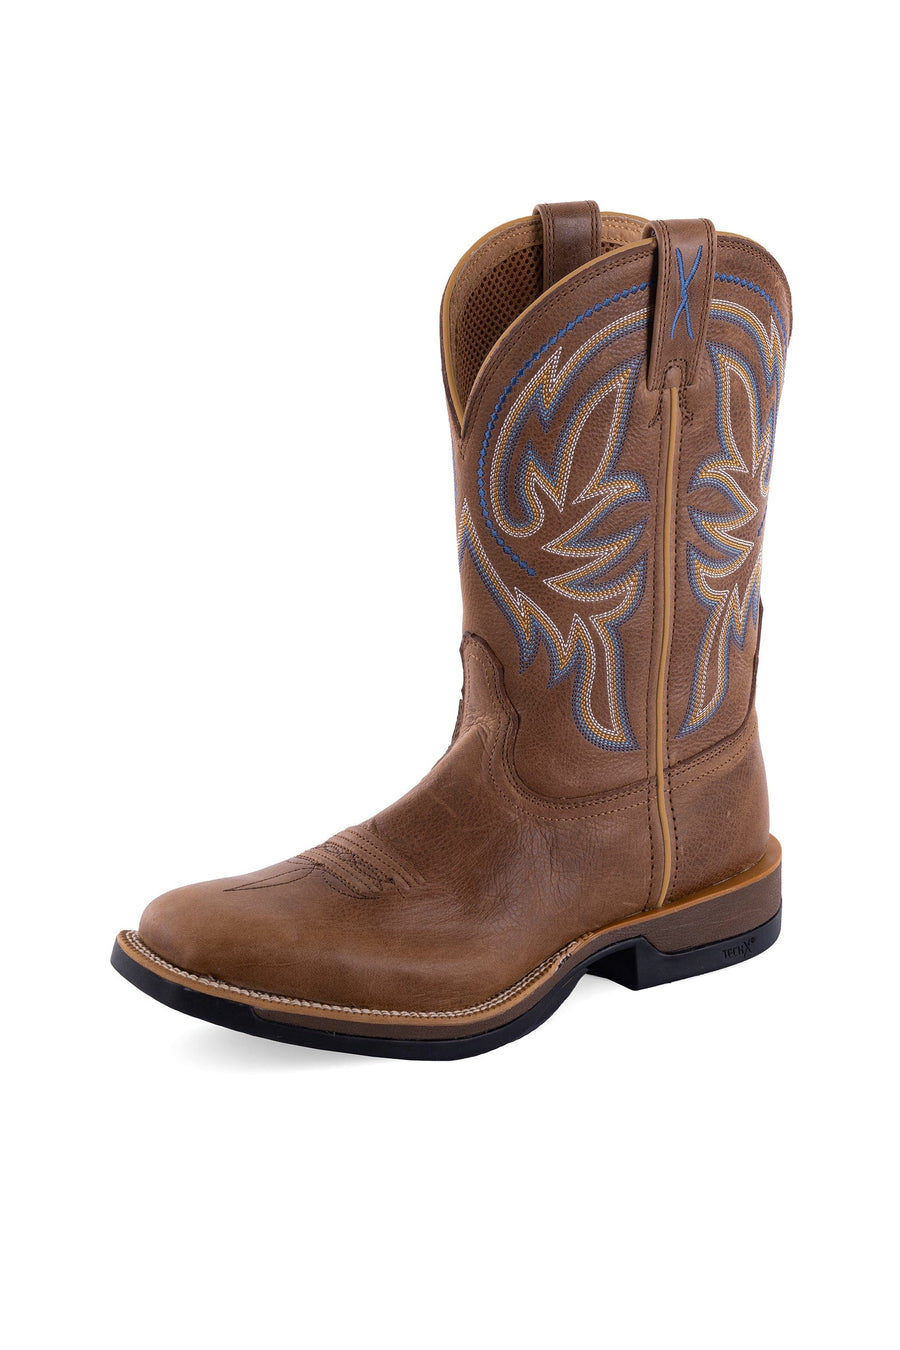 Twisted X Mens Boots & Shoes MEN 9 / Ginger/Ginger Twisted X Boots Mens 11 Tech X1 (TCMXW0008)